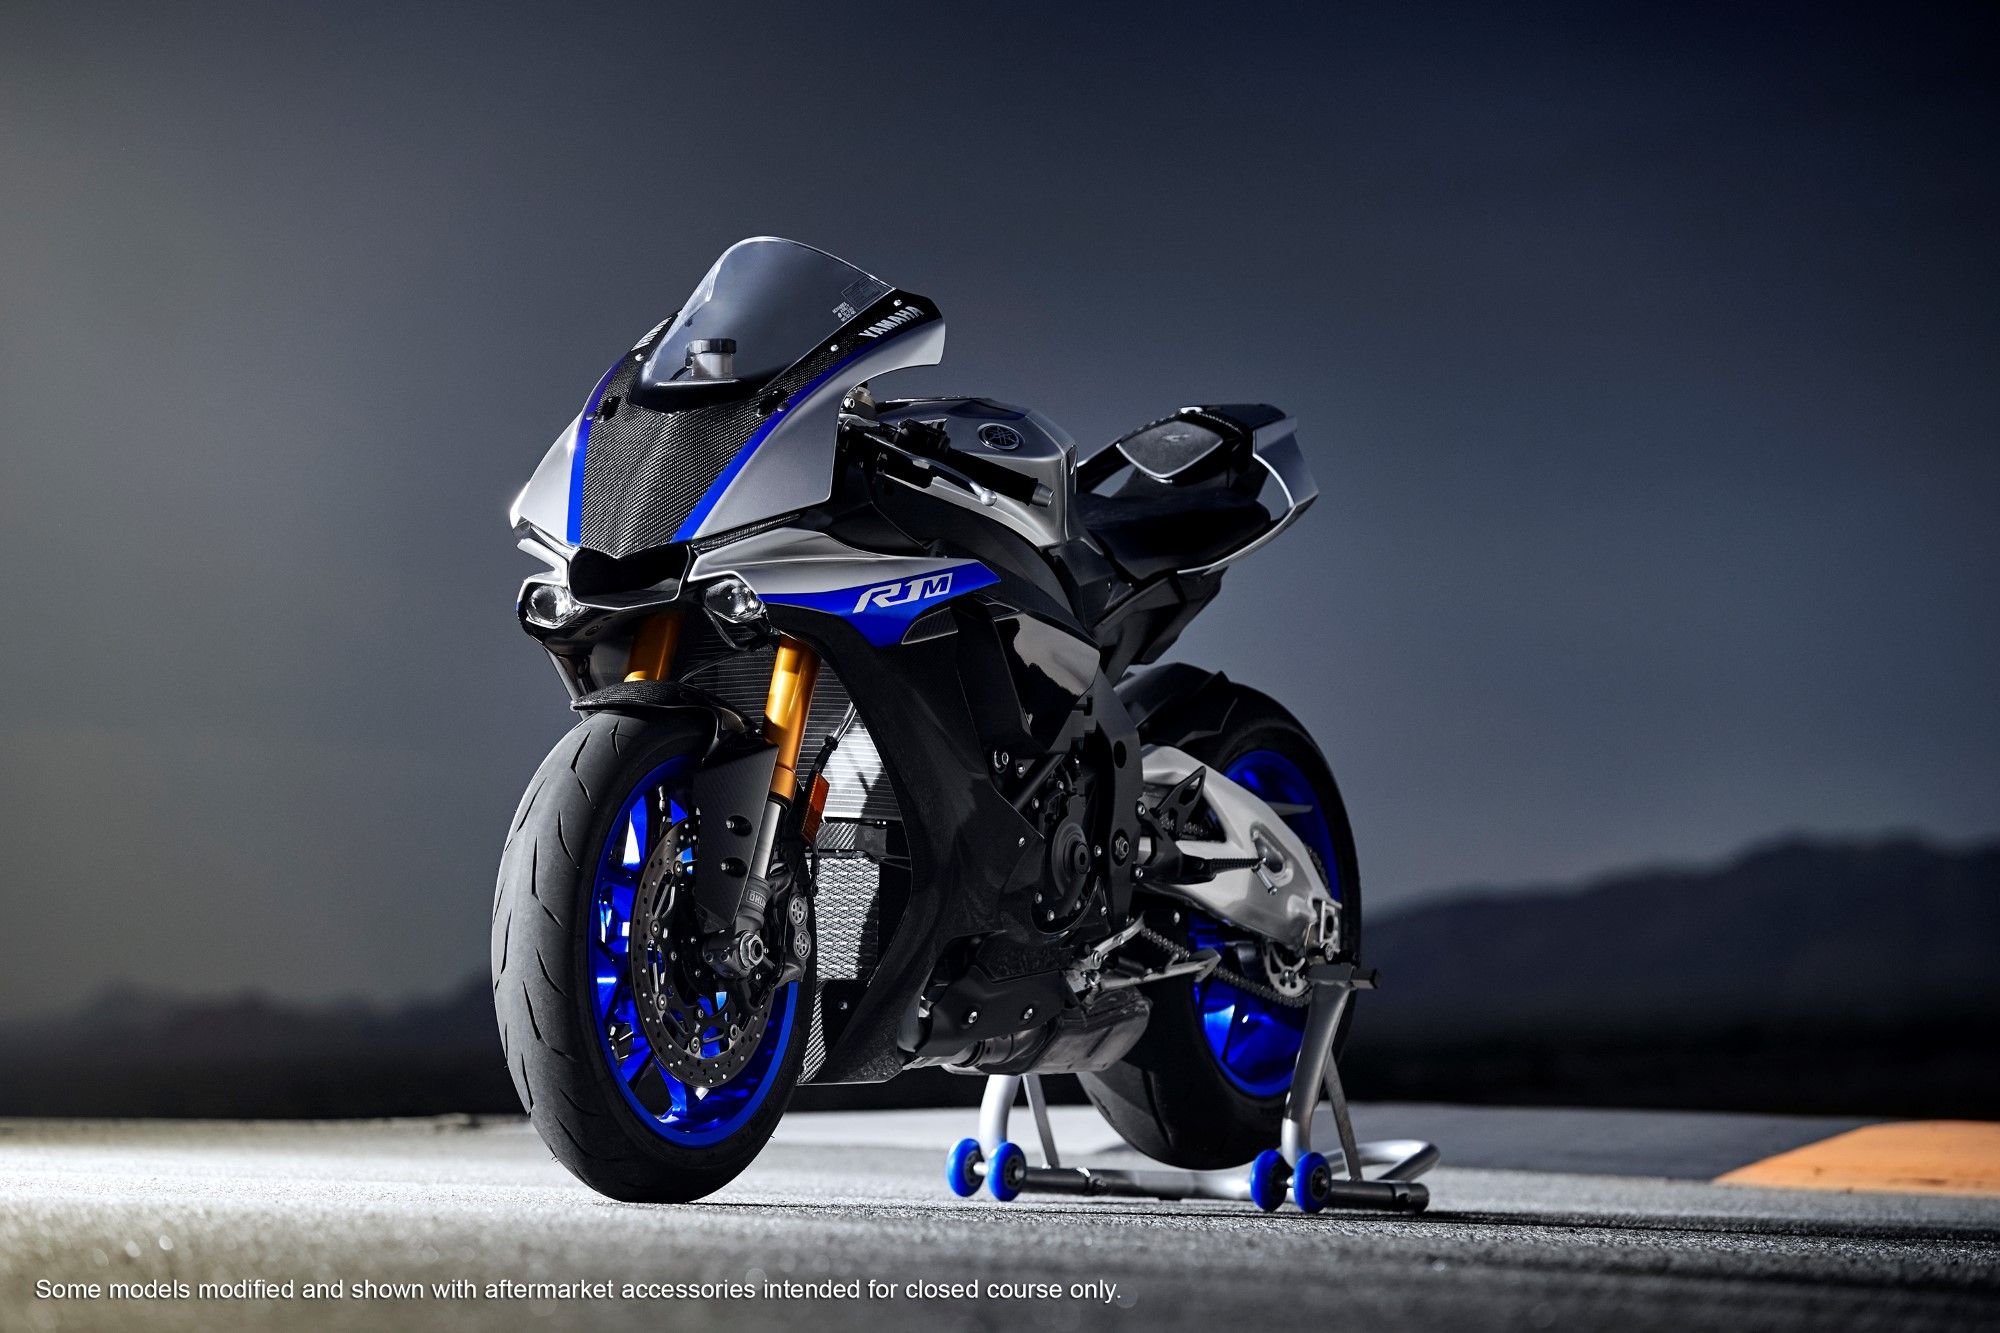 Yamaha YZFR1 and YZFR1M Superbikes gets updated for 2018